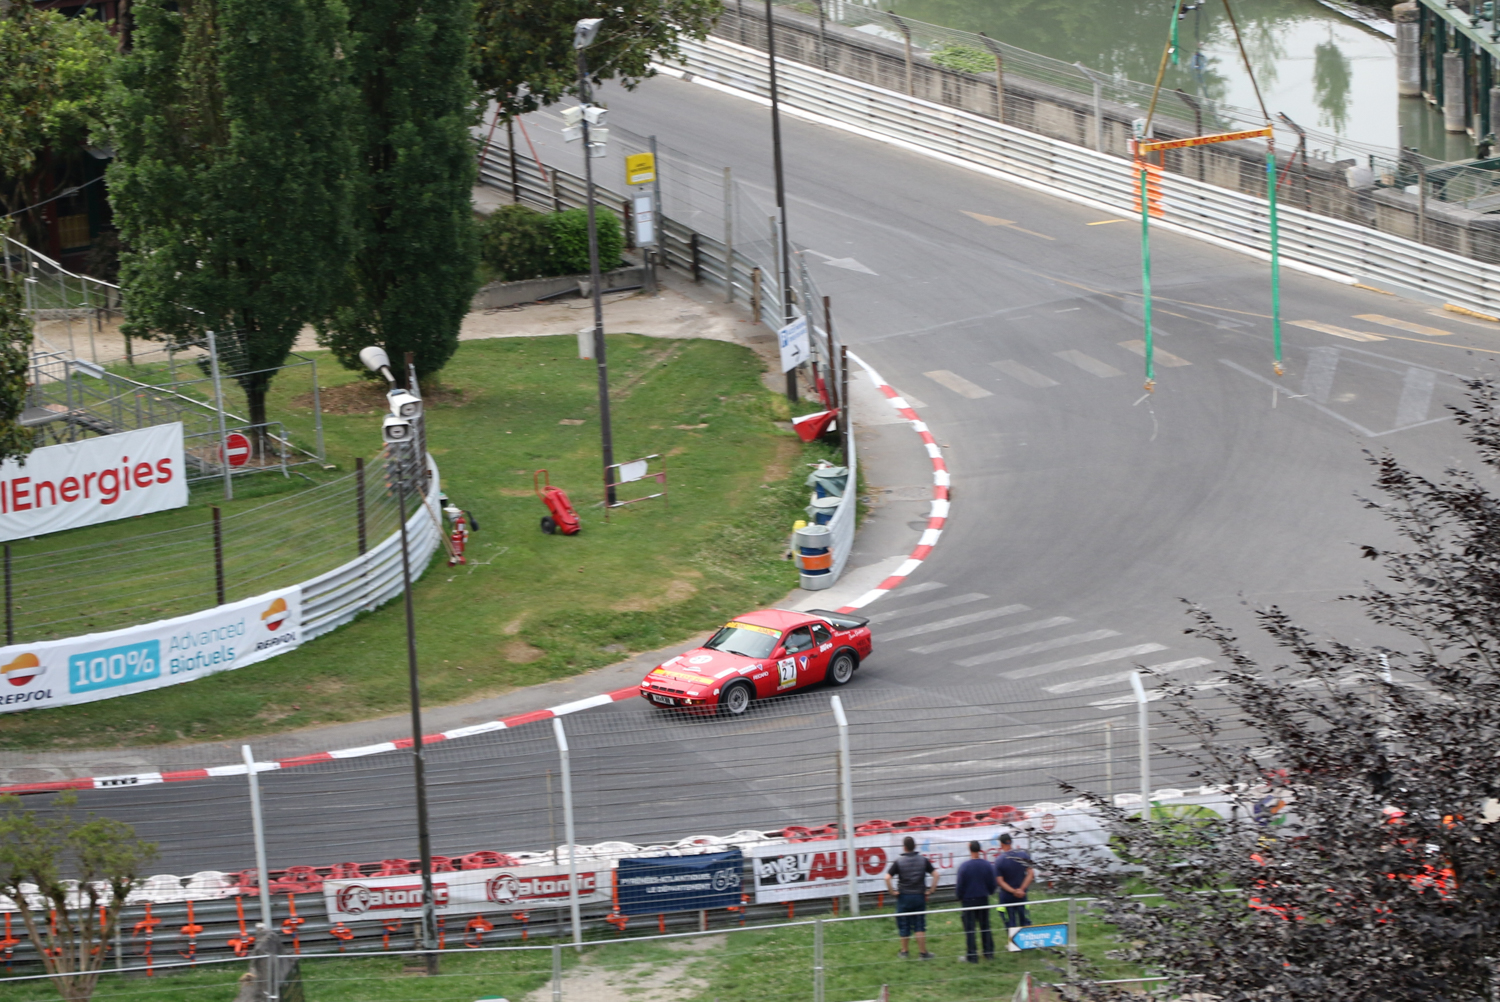 THE STATION HAIRPIN IS THE FIRST MAJOR CORNER AT PAU AND IT IS A LONG WAY DOWN. Picasa